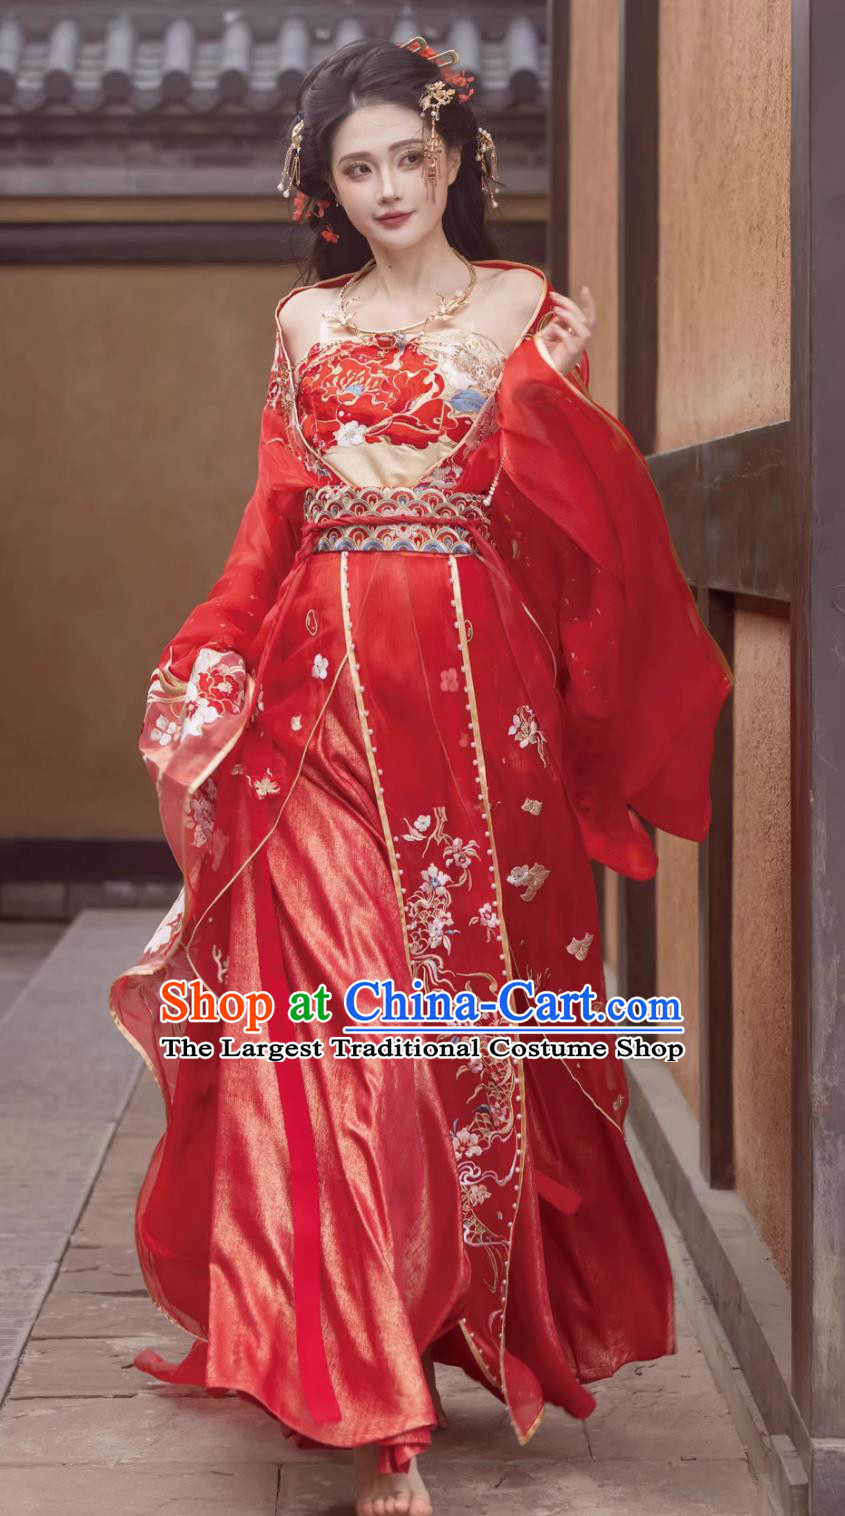 Chinese Ancient Princess Embroidered Garment Costumes Online Shop Hanfu Loong Year Wei Jin Northern and Southern Dynasties Wedding Dress